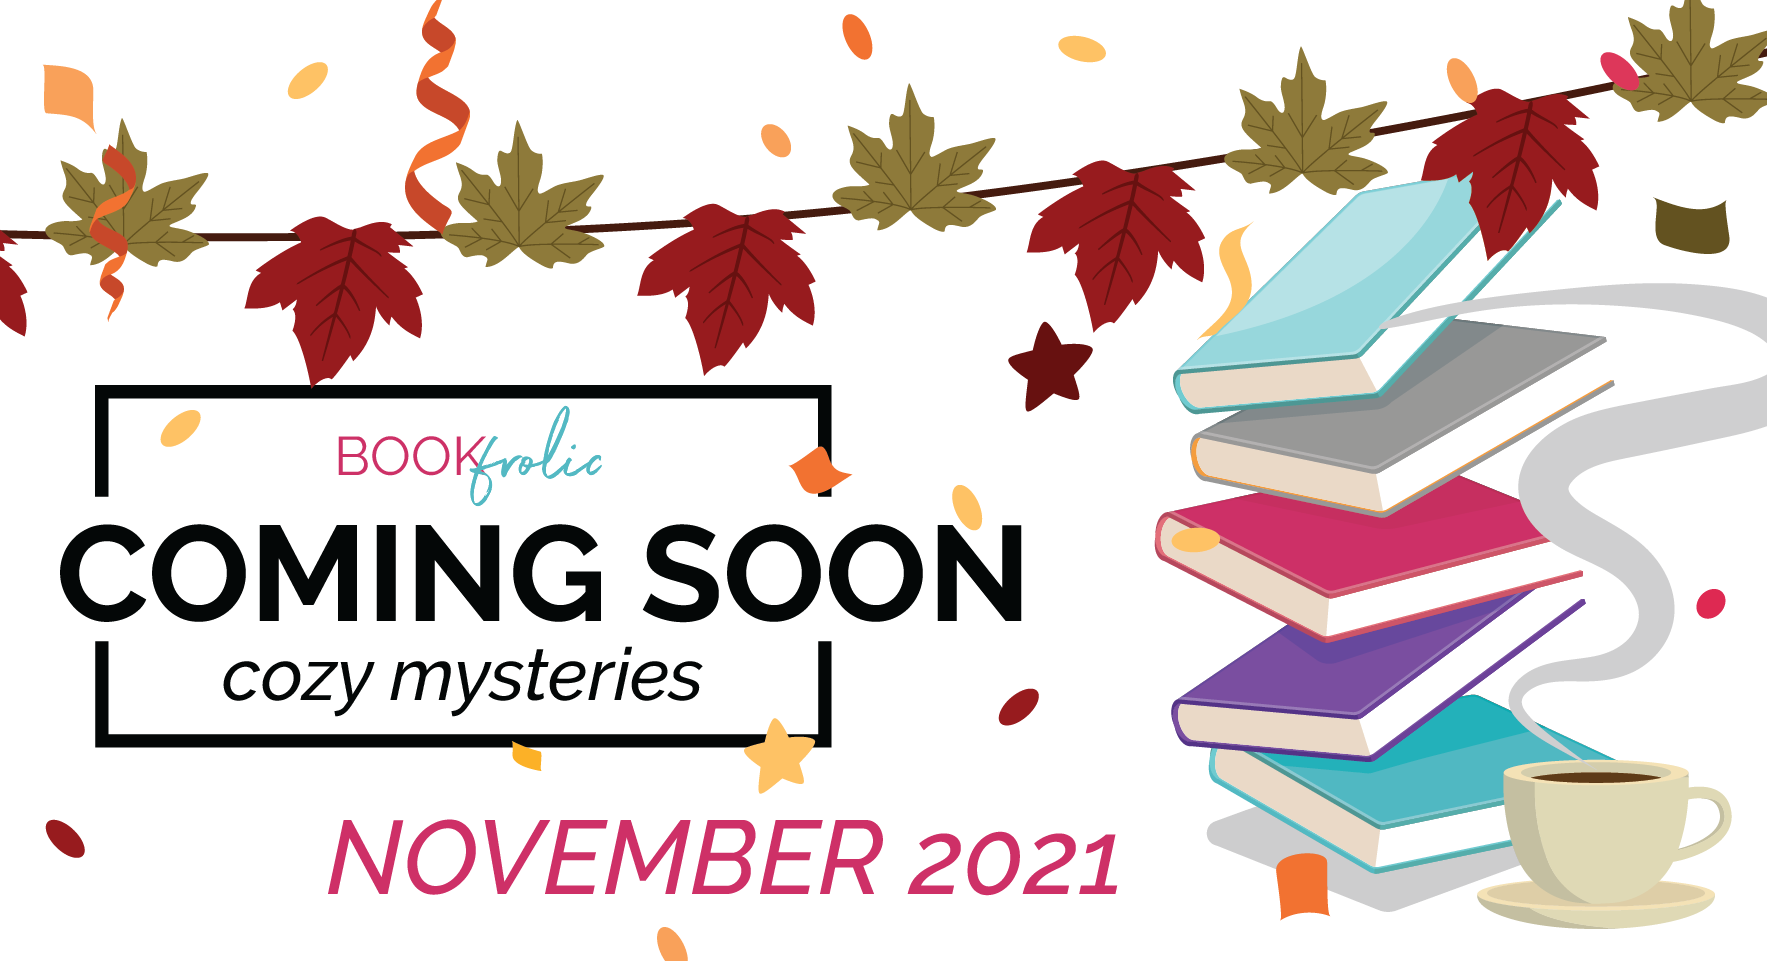 Coming soon - cozy mystery new releases for November 2021